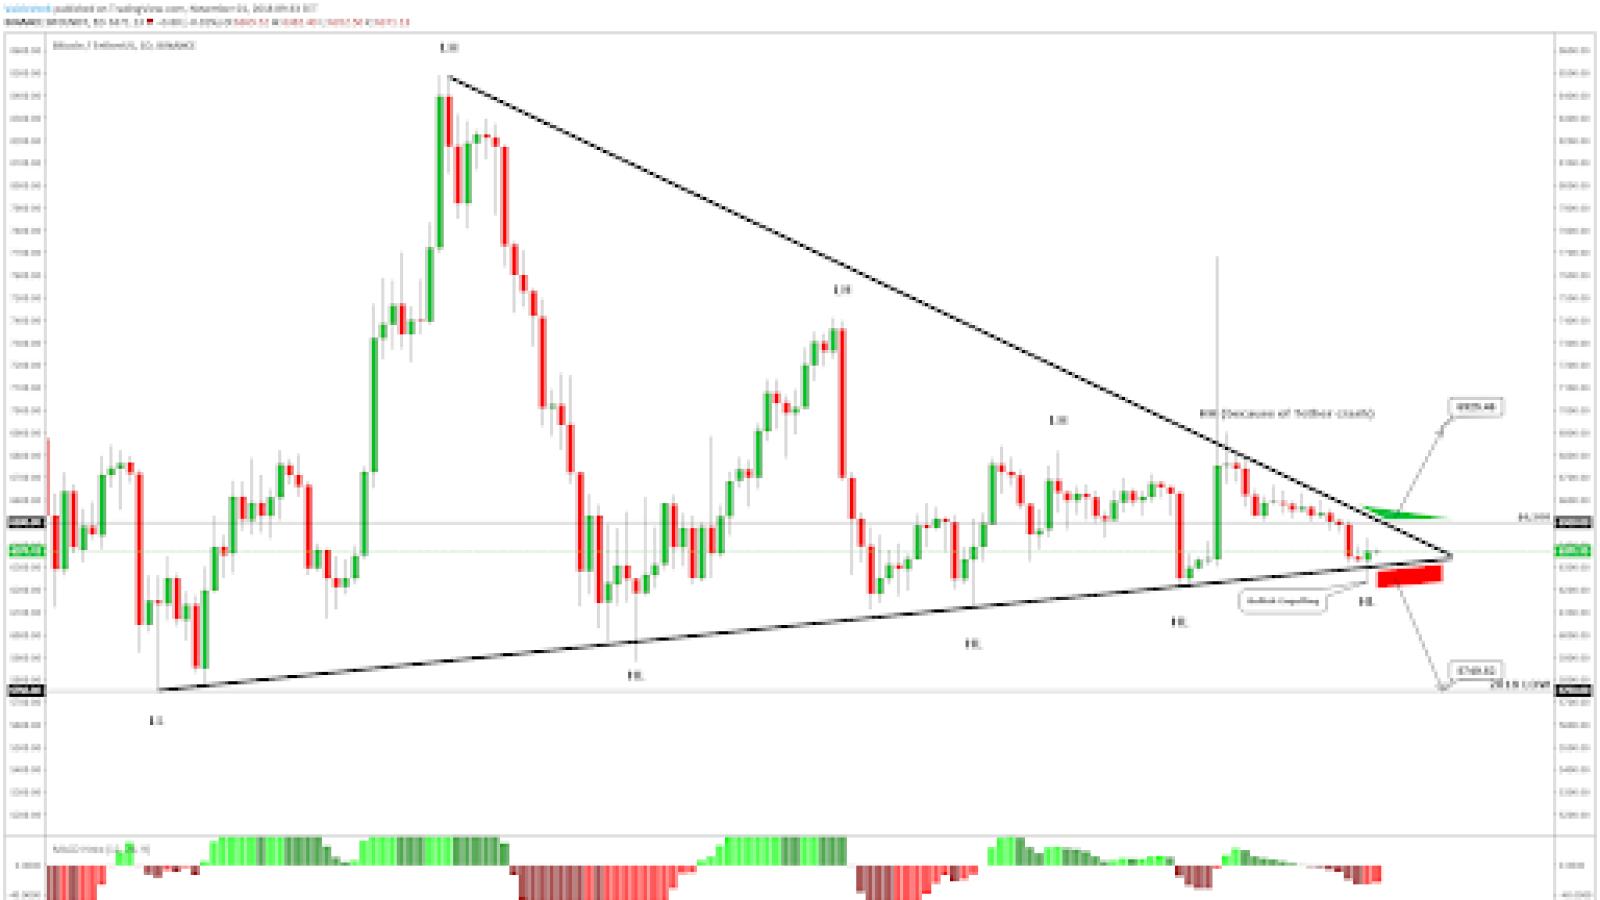 Bitcoin rejected from the strong crossing area